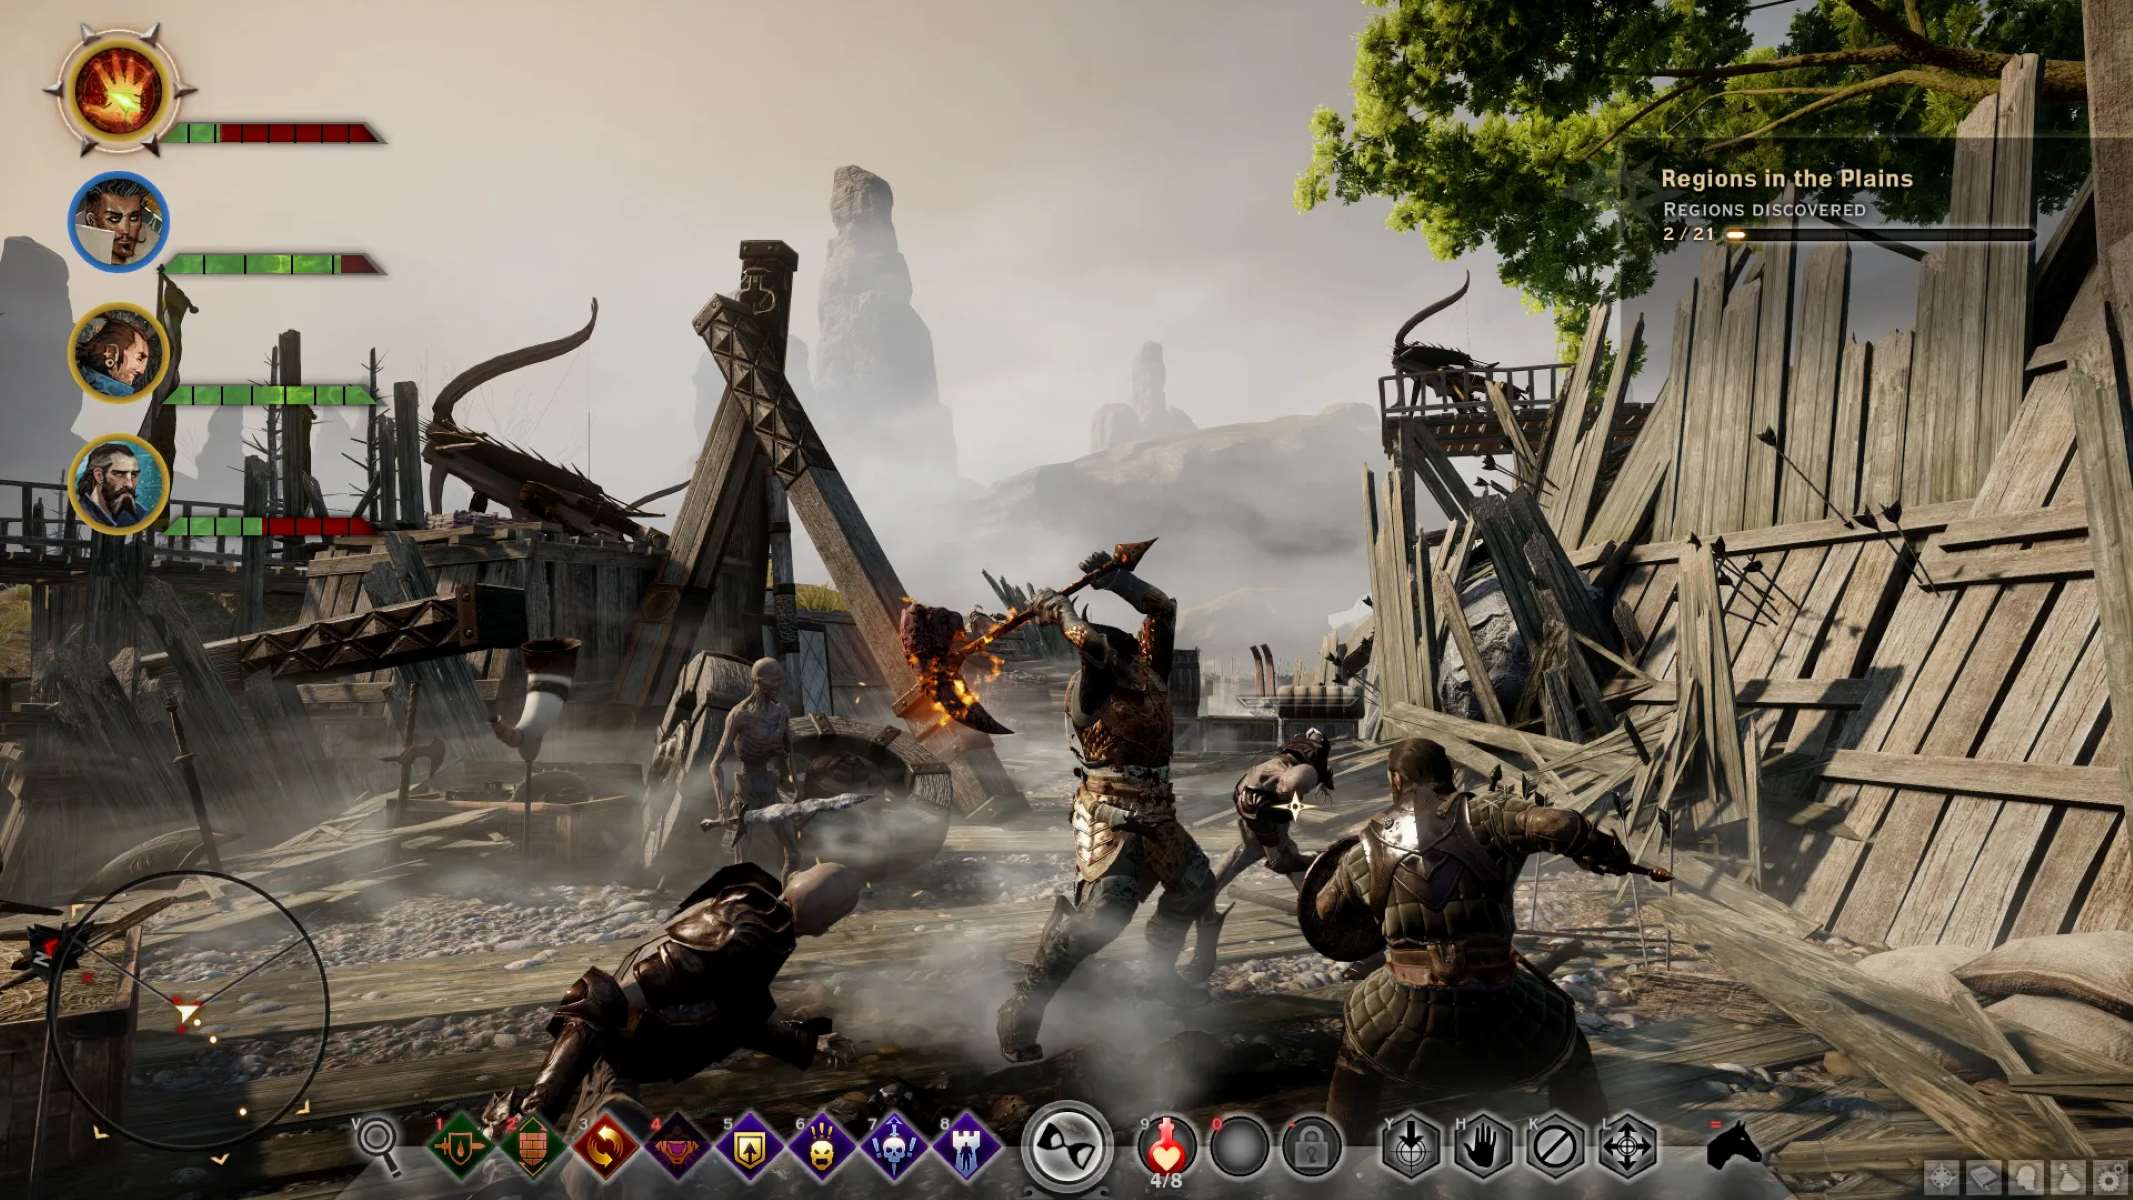 How To Get Dragon Age PC To Work With A Game Controller